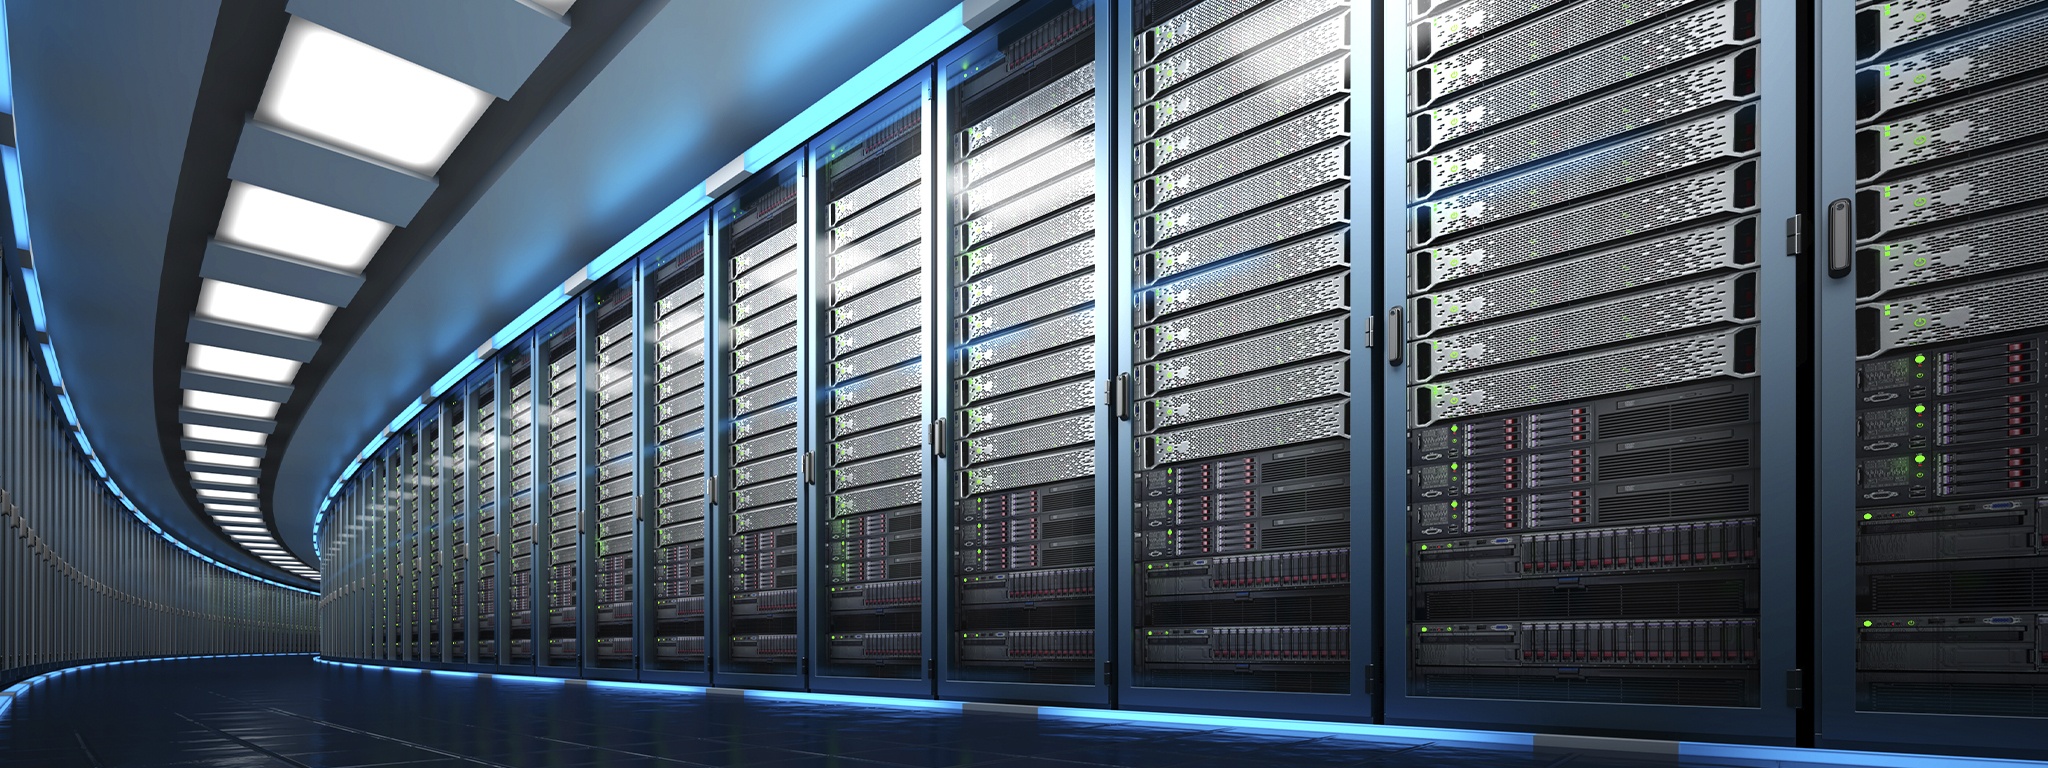 3D rendering of a data center showing a big server room with a long line of server rack unites